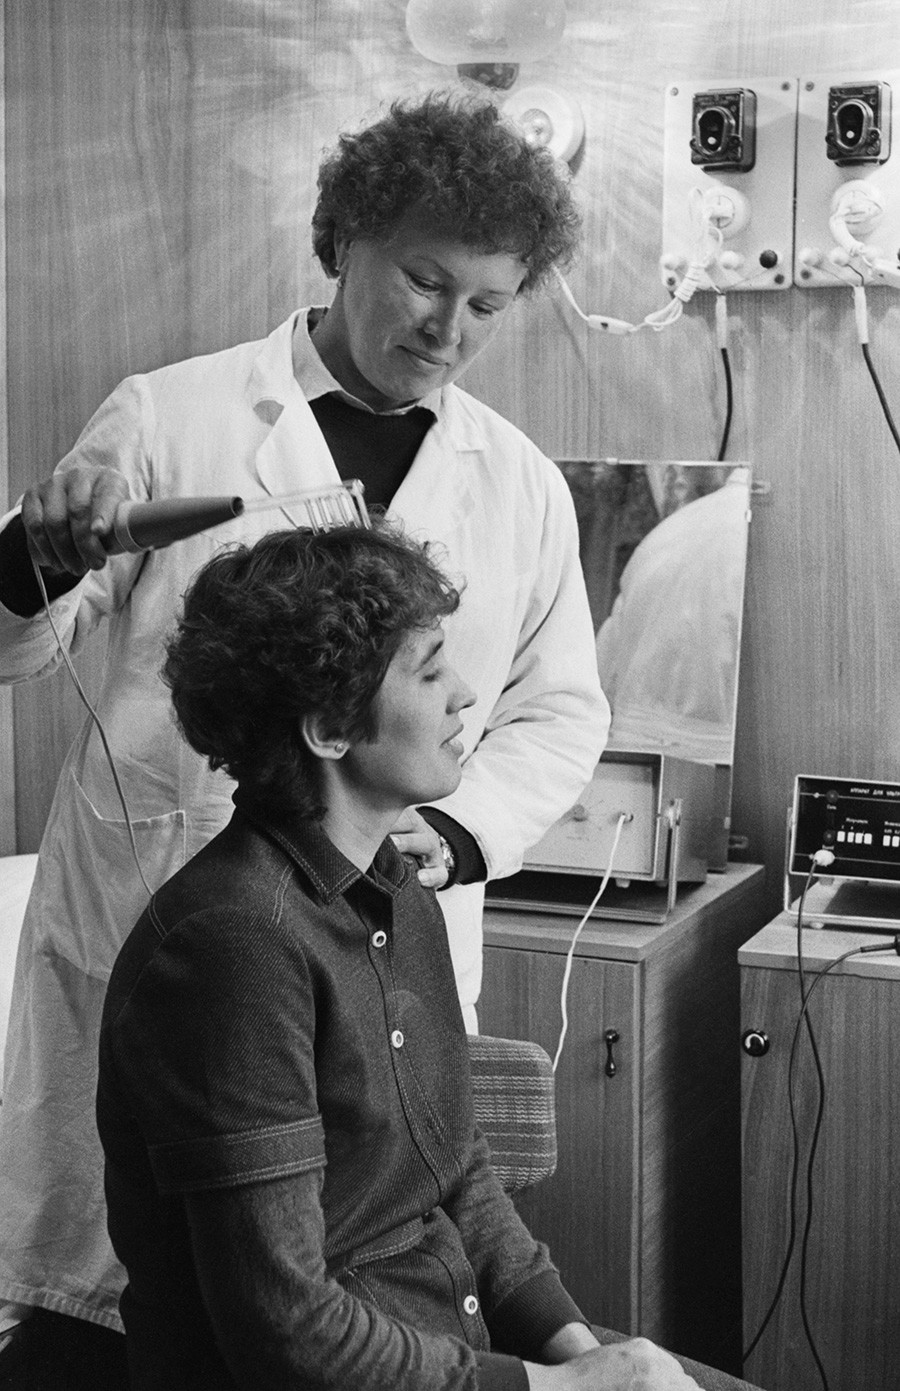 Employee of Bakharevka furniture factory of enterprise Permmebel in the physiotherapy room of the complex of household services, Perm, 1988.